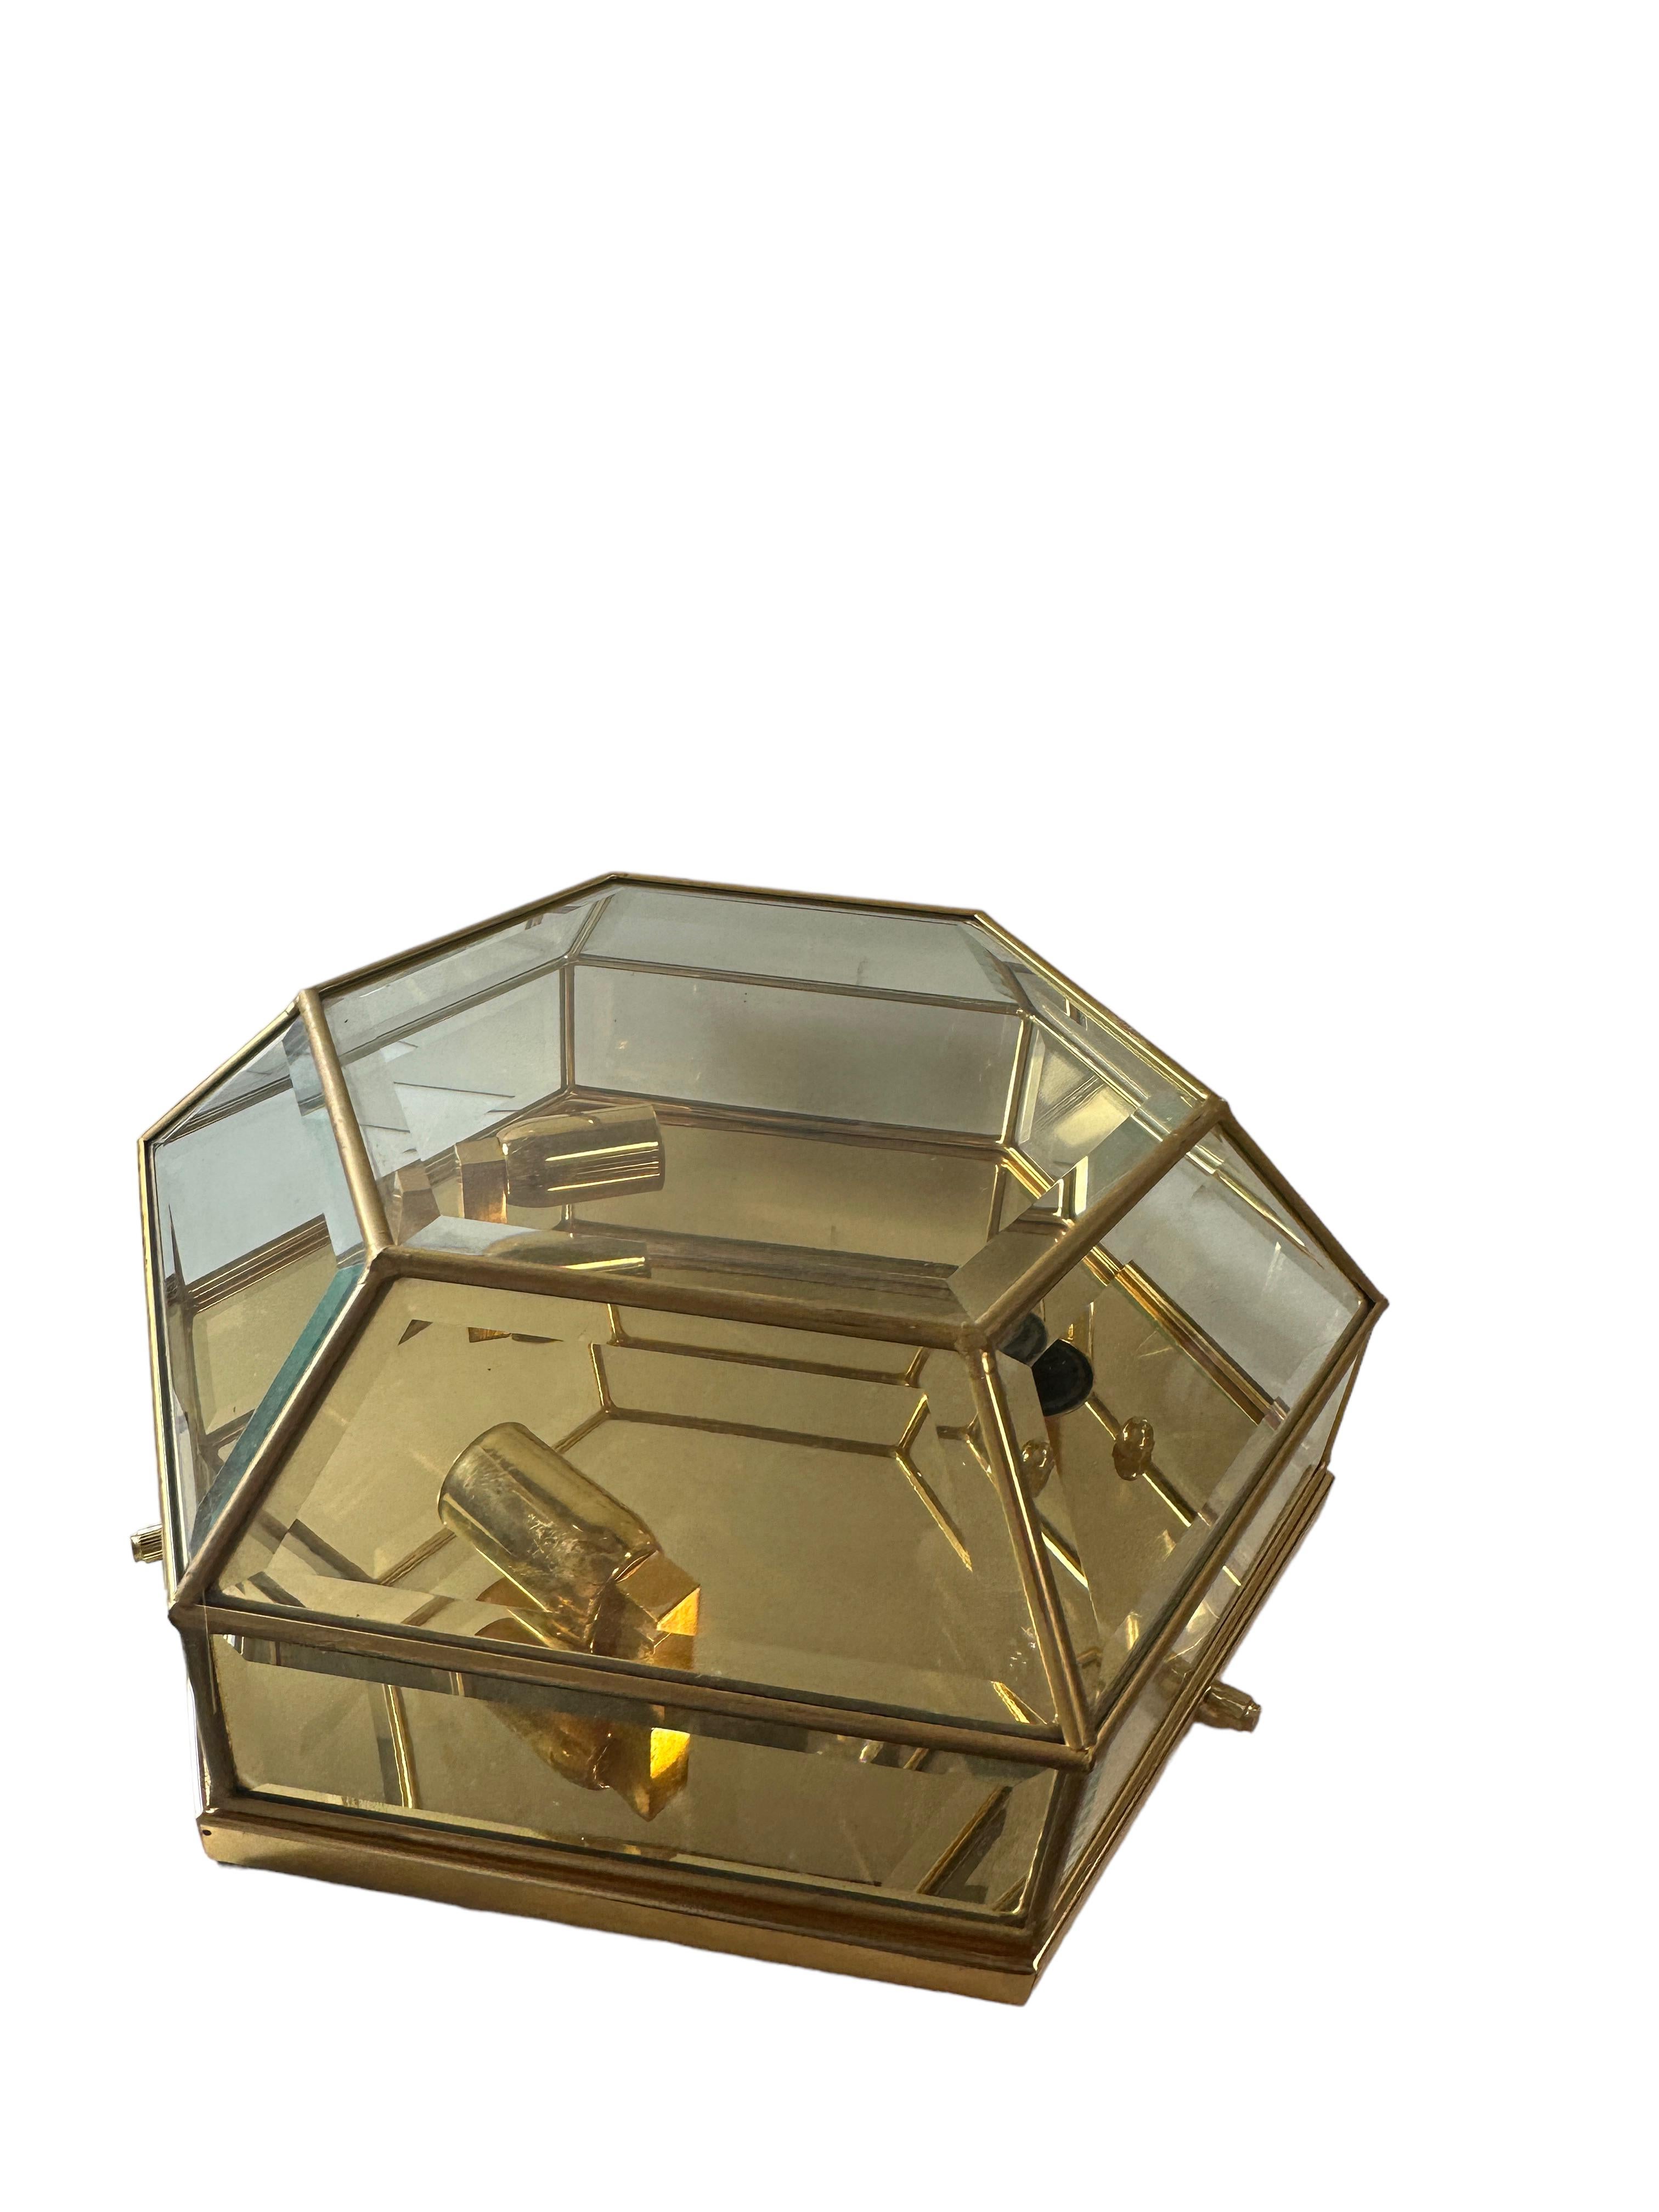 Stunning Mid-Century Modernist Octagonal Flush Mount Brass and Faceted Glass In Good Condition For Sale In Nuernberg, DE